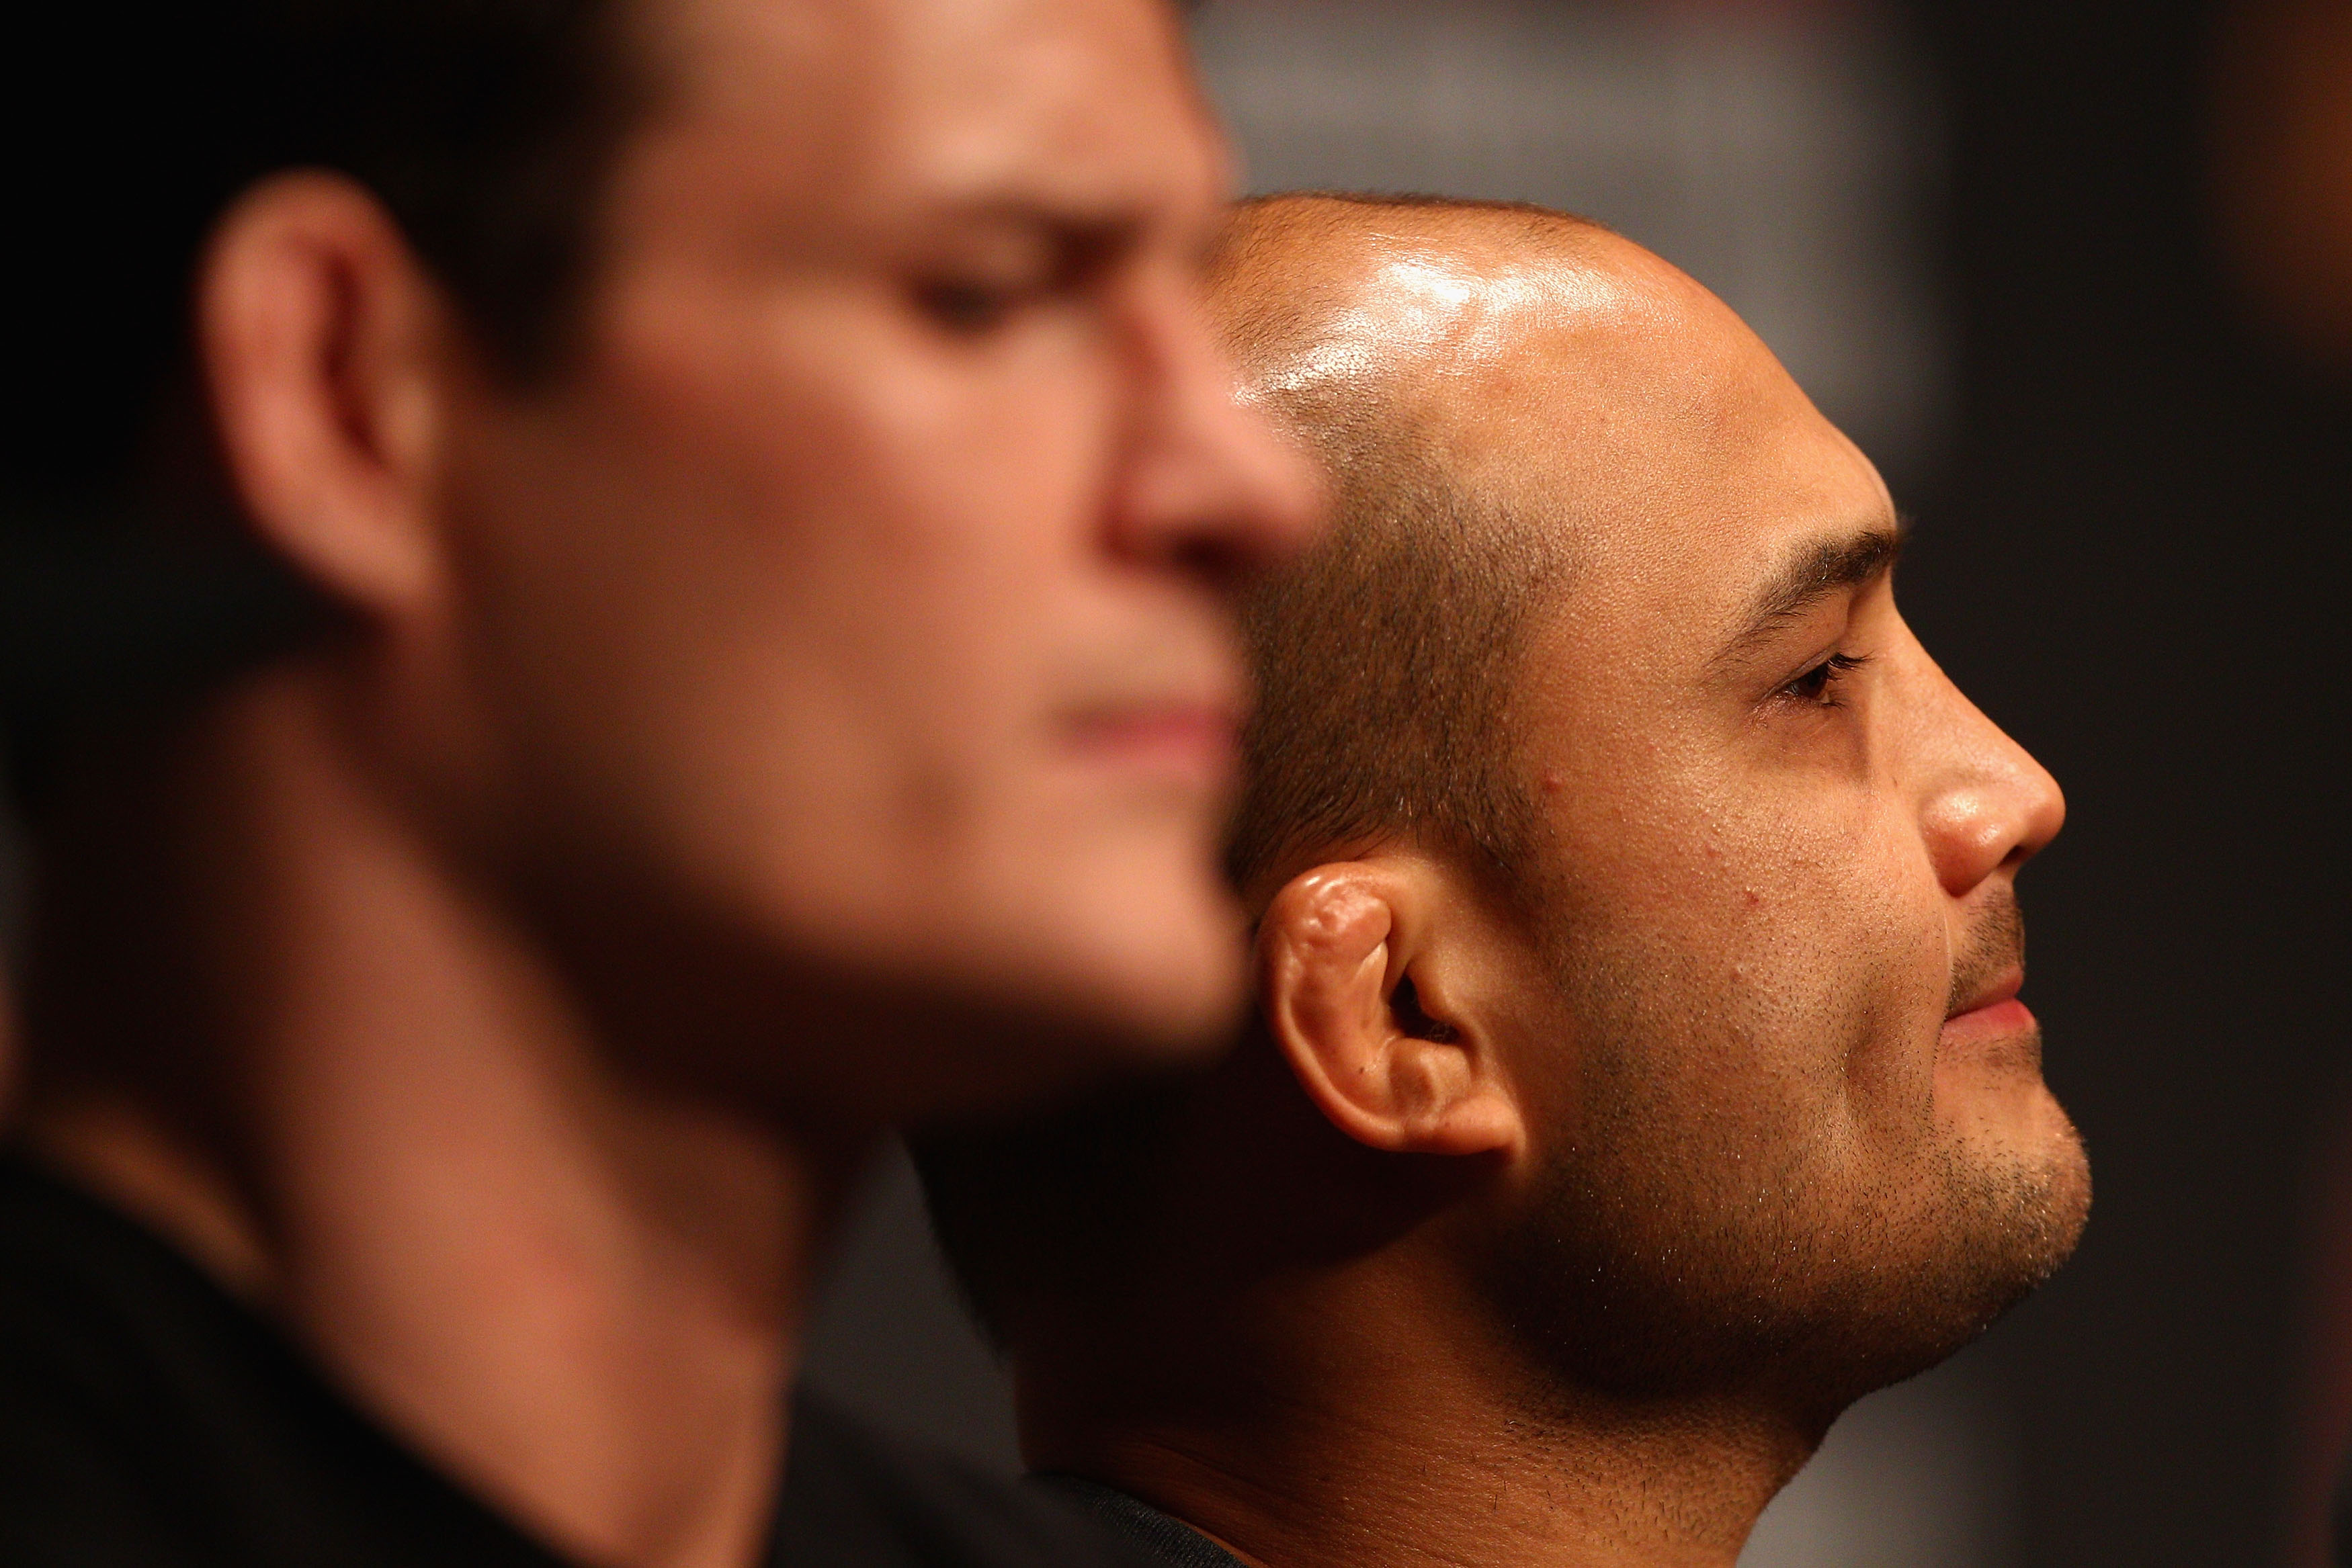 SYDNEY, AUSTRALIA - FEBRUARY 23:  BJ Penn of the USA looks on during a Press Conference ahead of UFC 127 at Star City on February 23, 2011 in Sydney, Australia.  (Photo by Ryan Pierse/Getty Images)